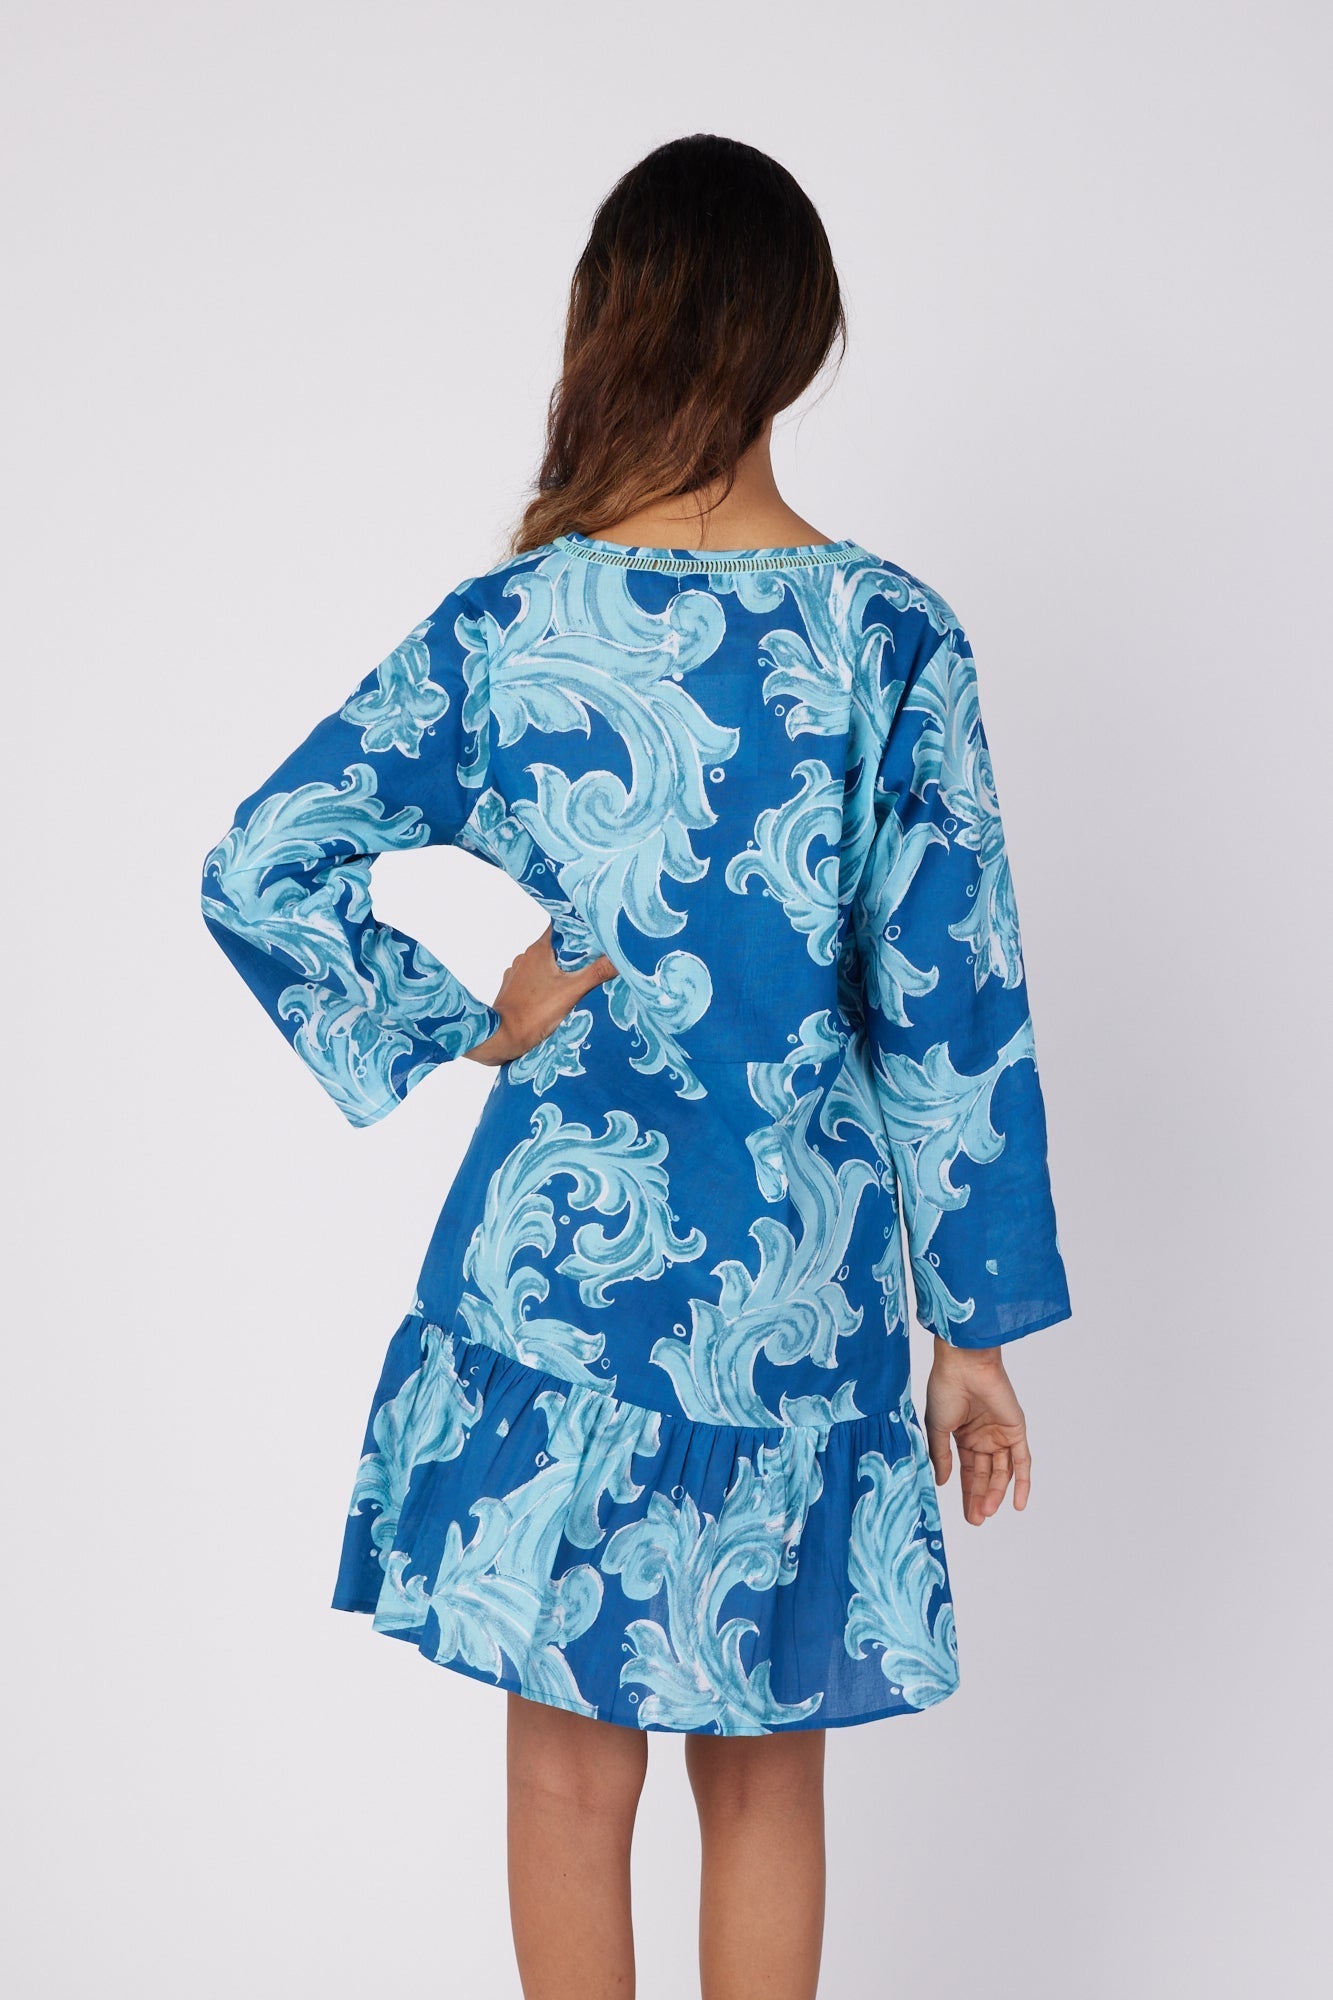 ModaPosa Brigida 3/4 Sleeve Ruffle Knee Length V-Neck Dress in Deep Blue Baroque . Discover women's resort dresses and lifestyle clothing inspired by the Mediterranean. Free worldwide shipping available!